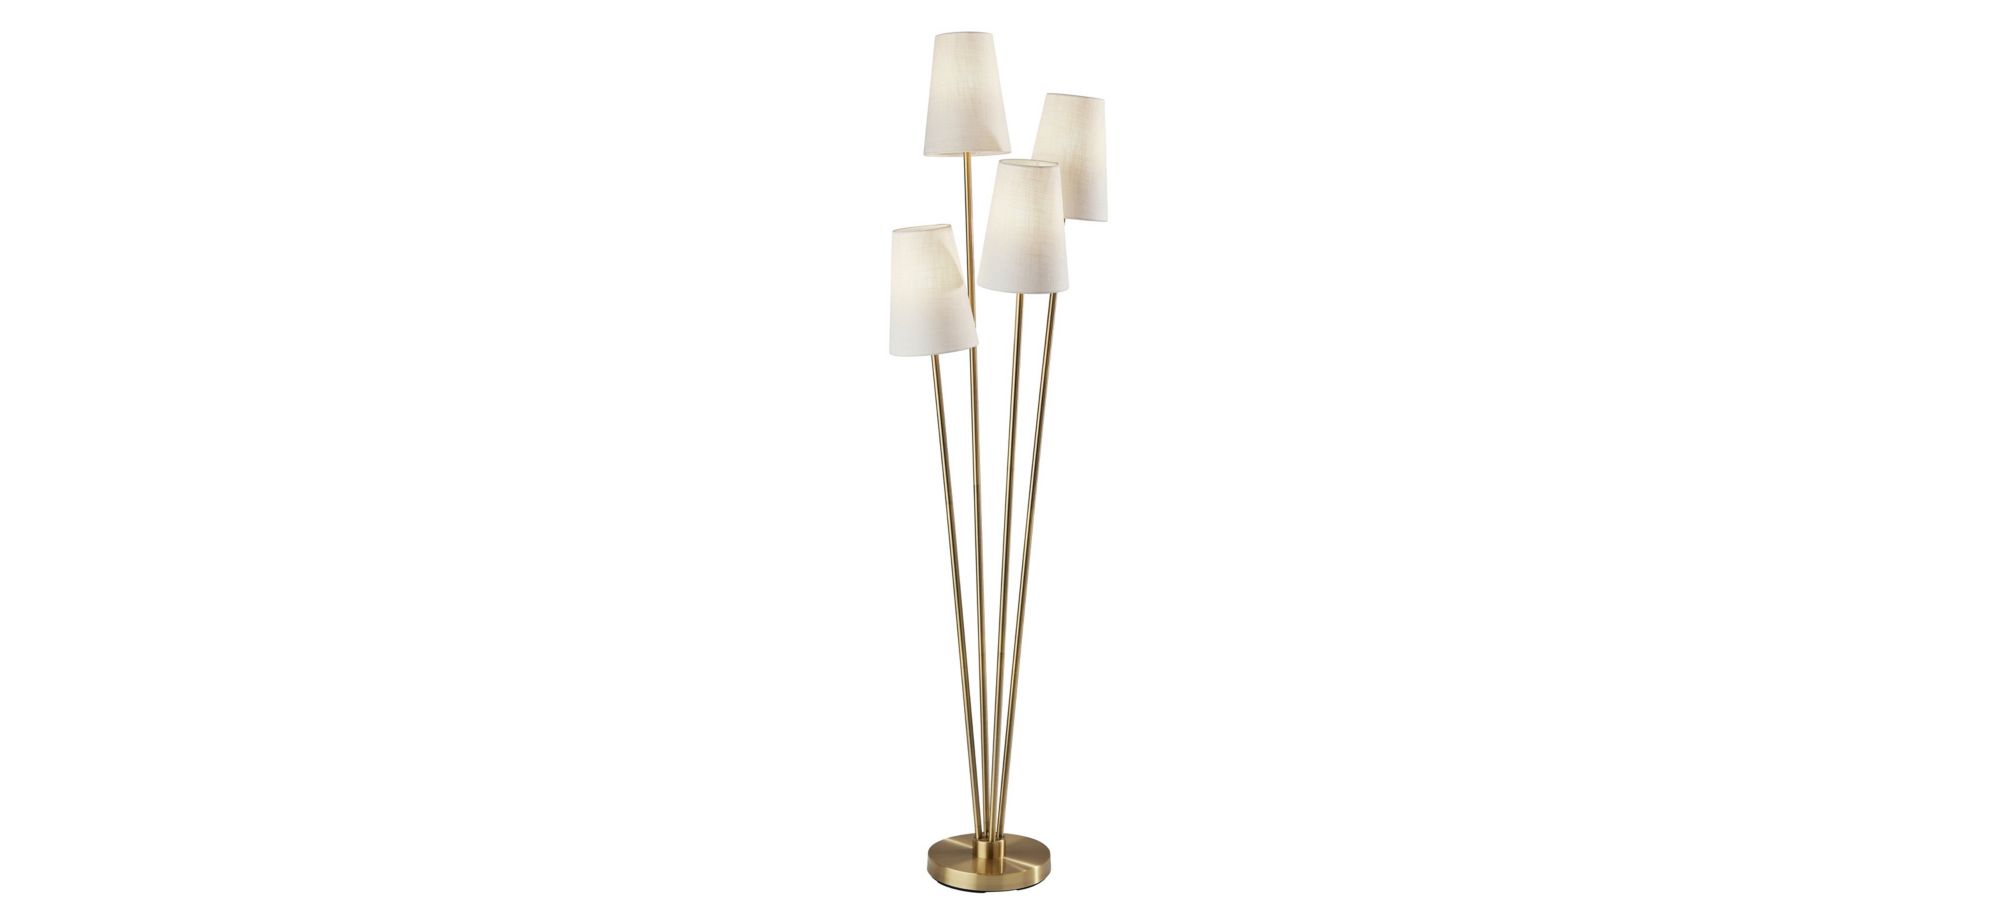 Wentworth Floor Lamp in Antiqued Brass with White Shade by Adesso Inc